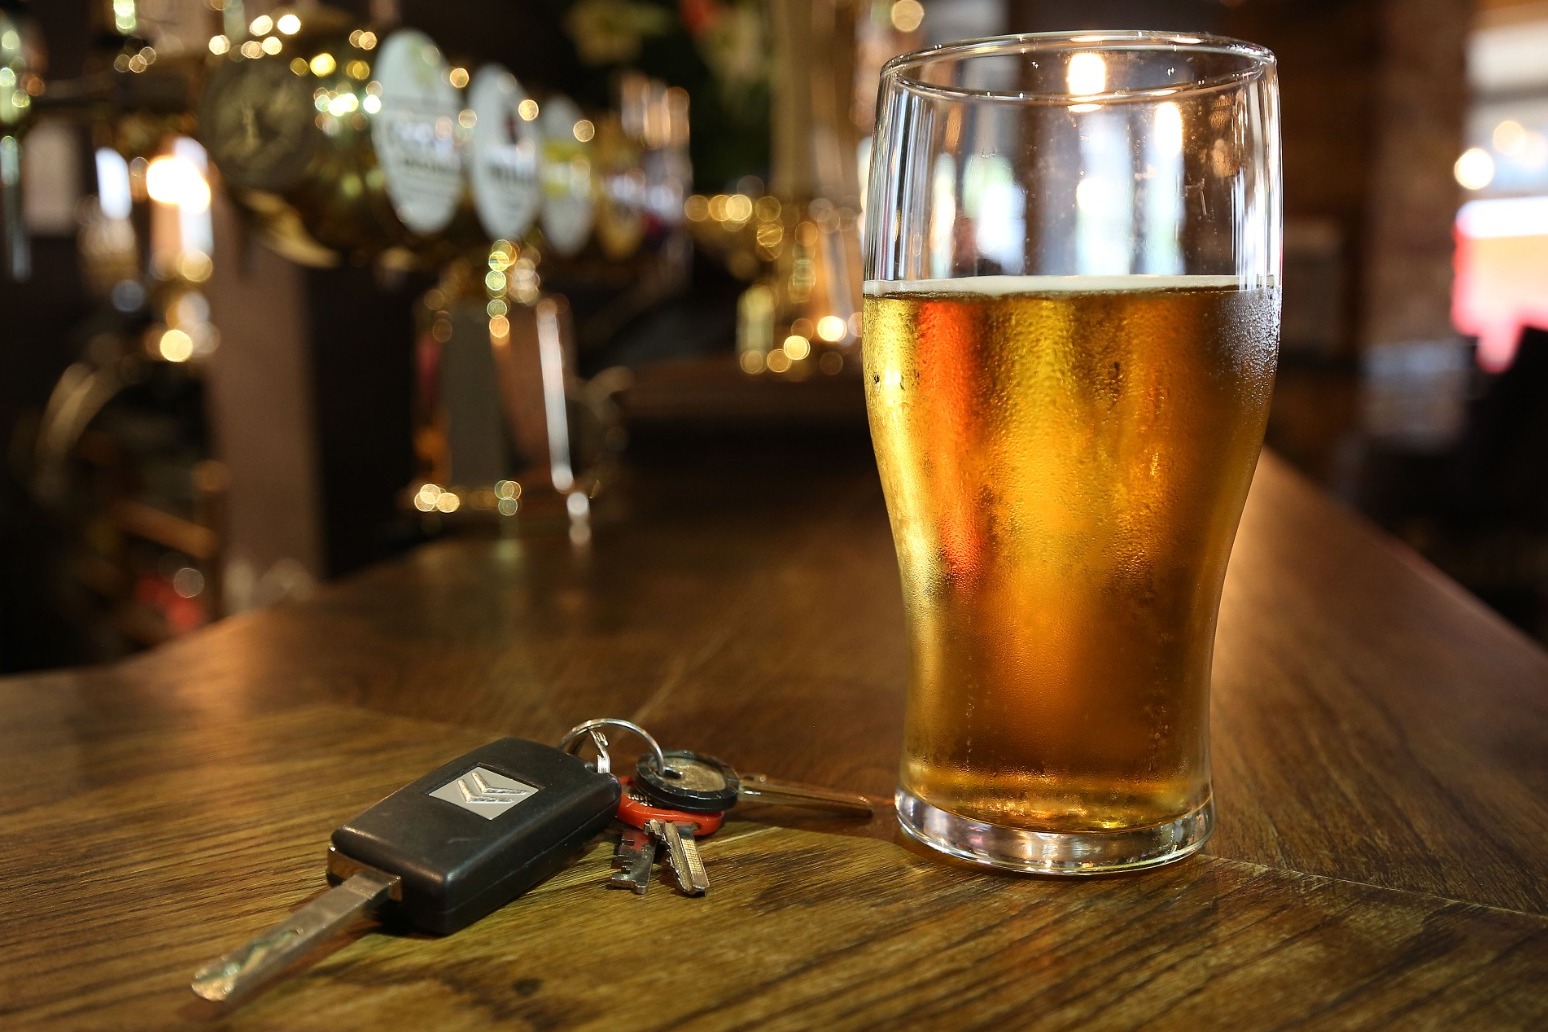 Drink drivers could be disqualified at the roadside